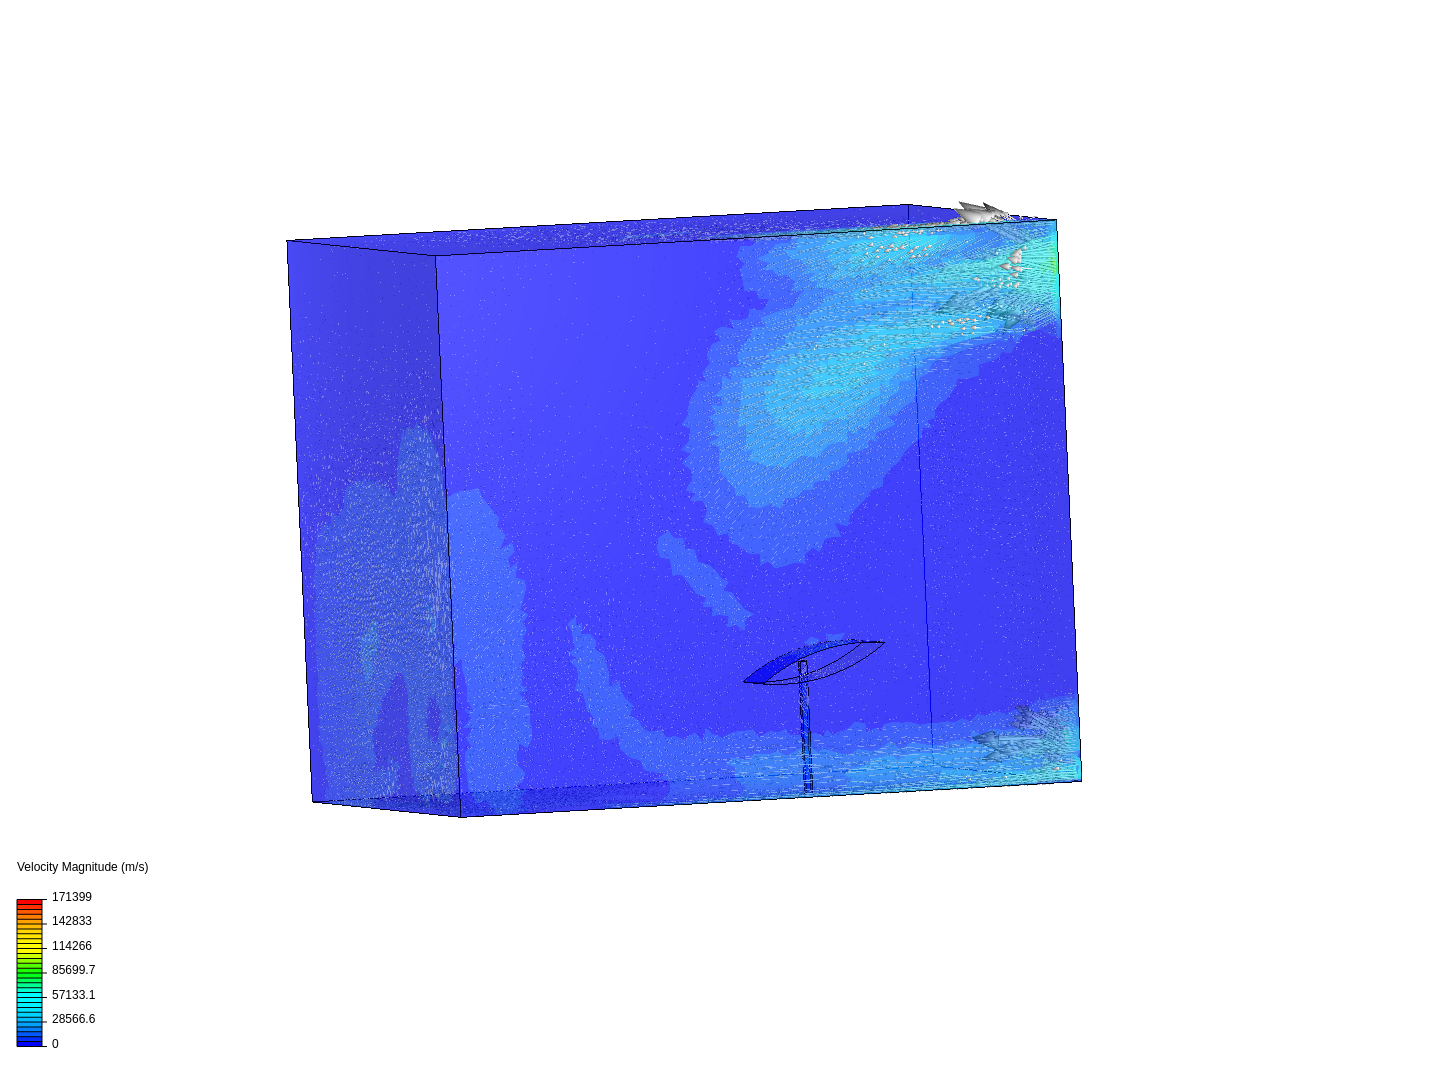 HND CFD TEST image